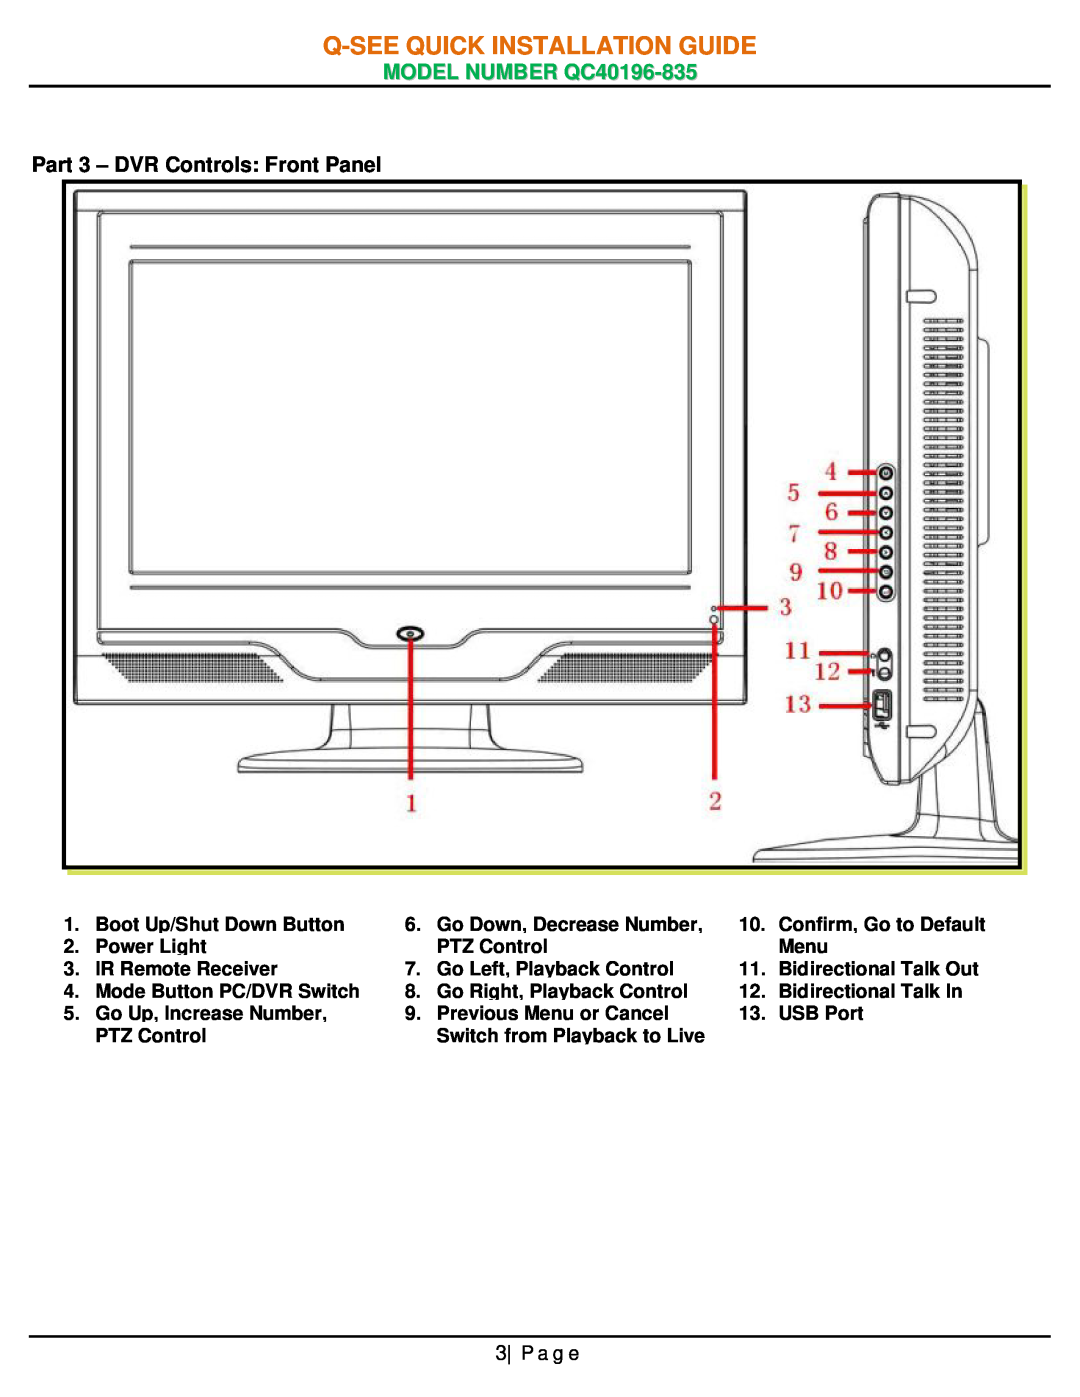 Q-See manual Part 3 - DVR Controls Front Panel, P a g e, Q-See Quick Installation Guide, MODEL NUMBER QC40196-835 